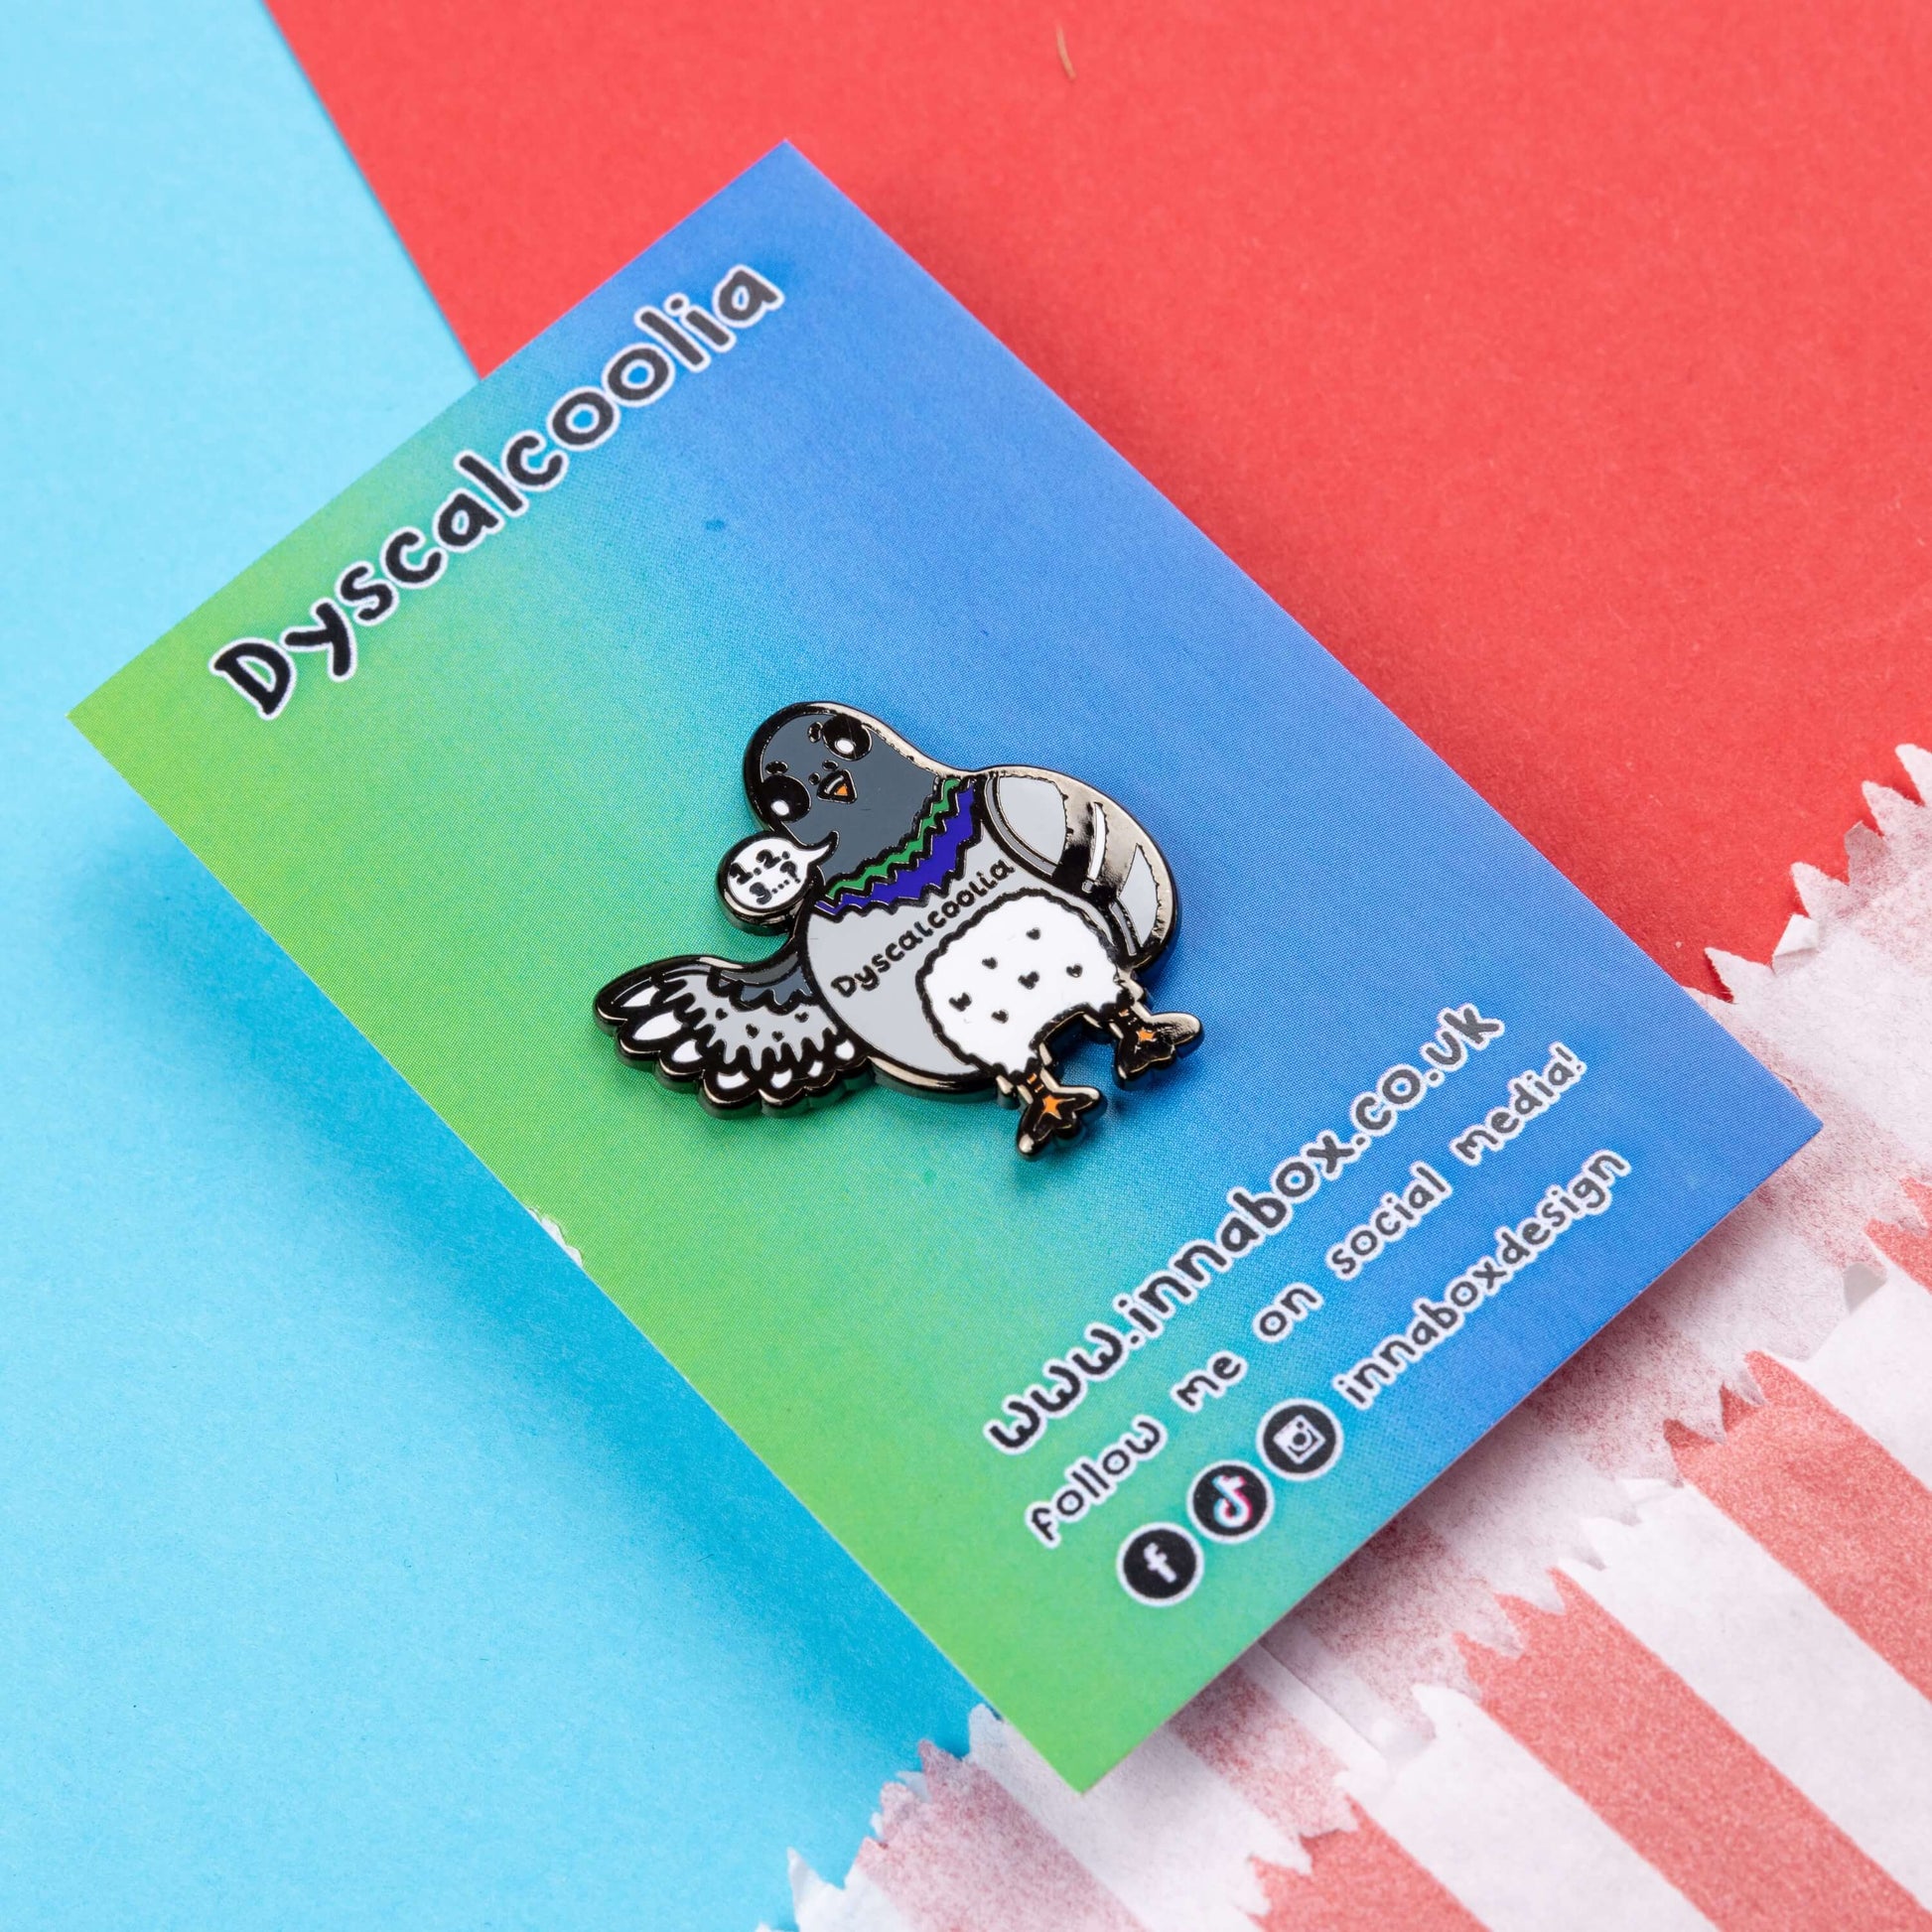 The Dyscalcoolia Pigeon Enamel Pin - Dyscalculia on a blue to green gradient backing card with black text. A Pigeon looking confused holding up a wing with a speech bubble full of numbers and a question mark across its chest reads 'dyscalcoolia'. The enamel pin is raising awareness for dyscalculia.